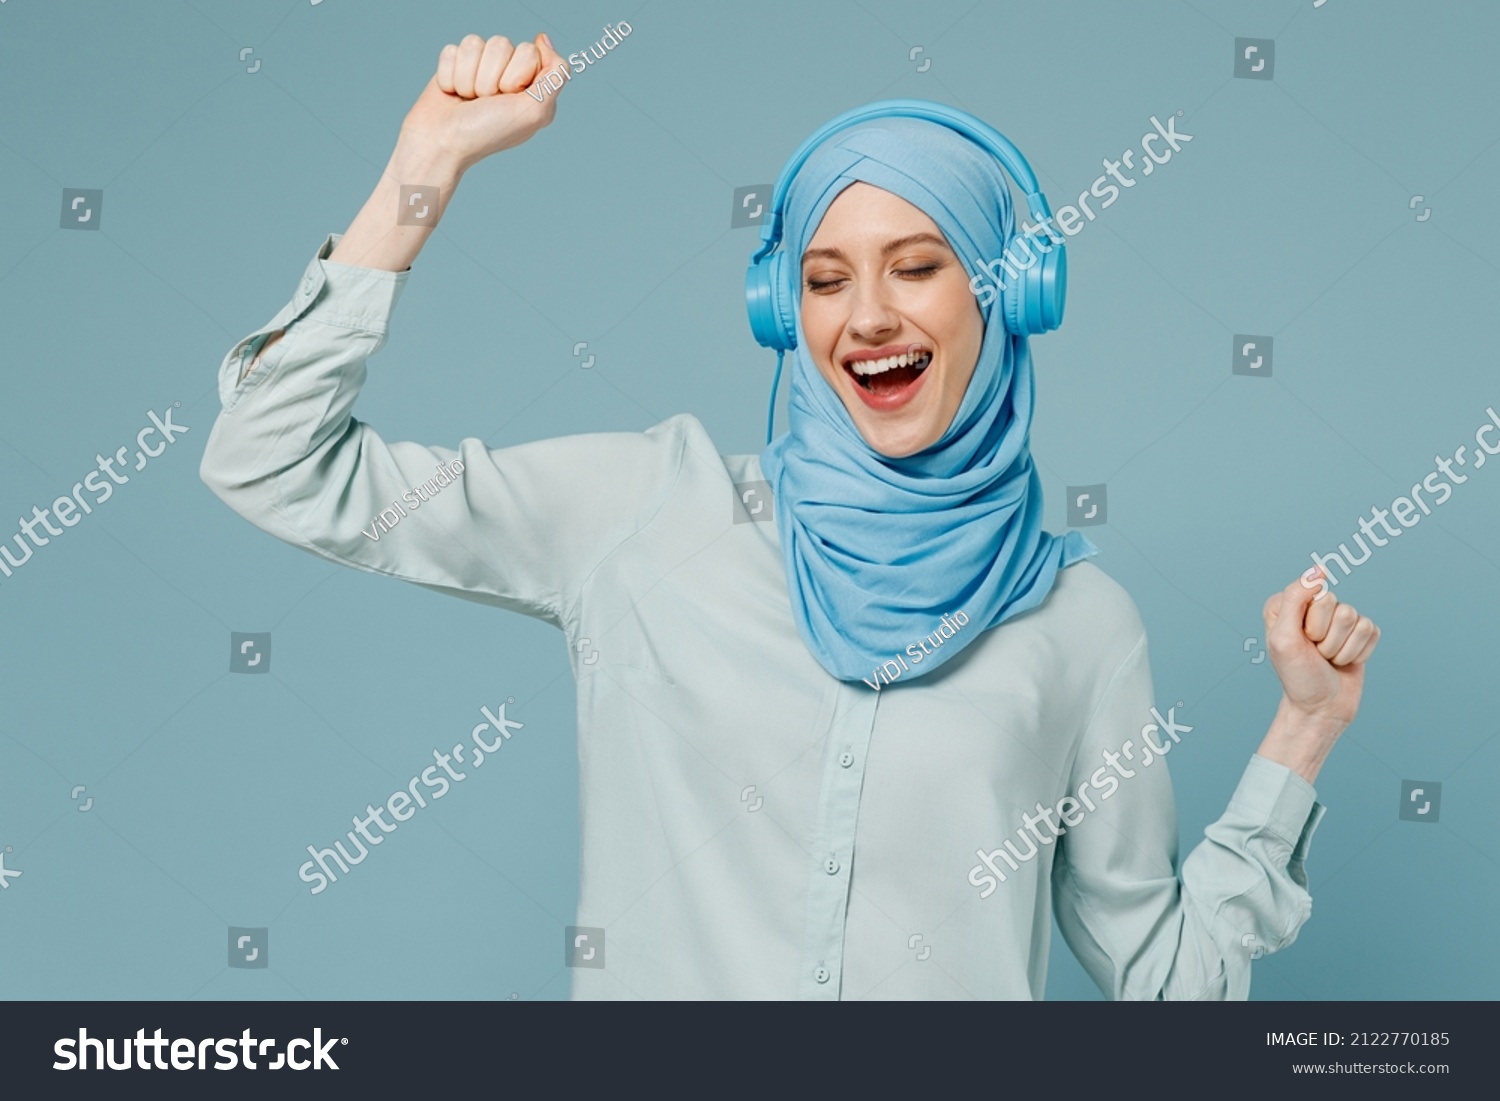 Young smiling arabian asian muslim woman in abaya hijab headphones listen to music dancing have fun isolated on plain blue background studio portrait. People uae middle eastern islam religious concept #2122770185